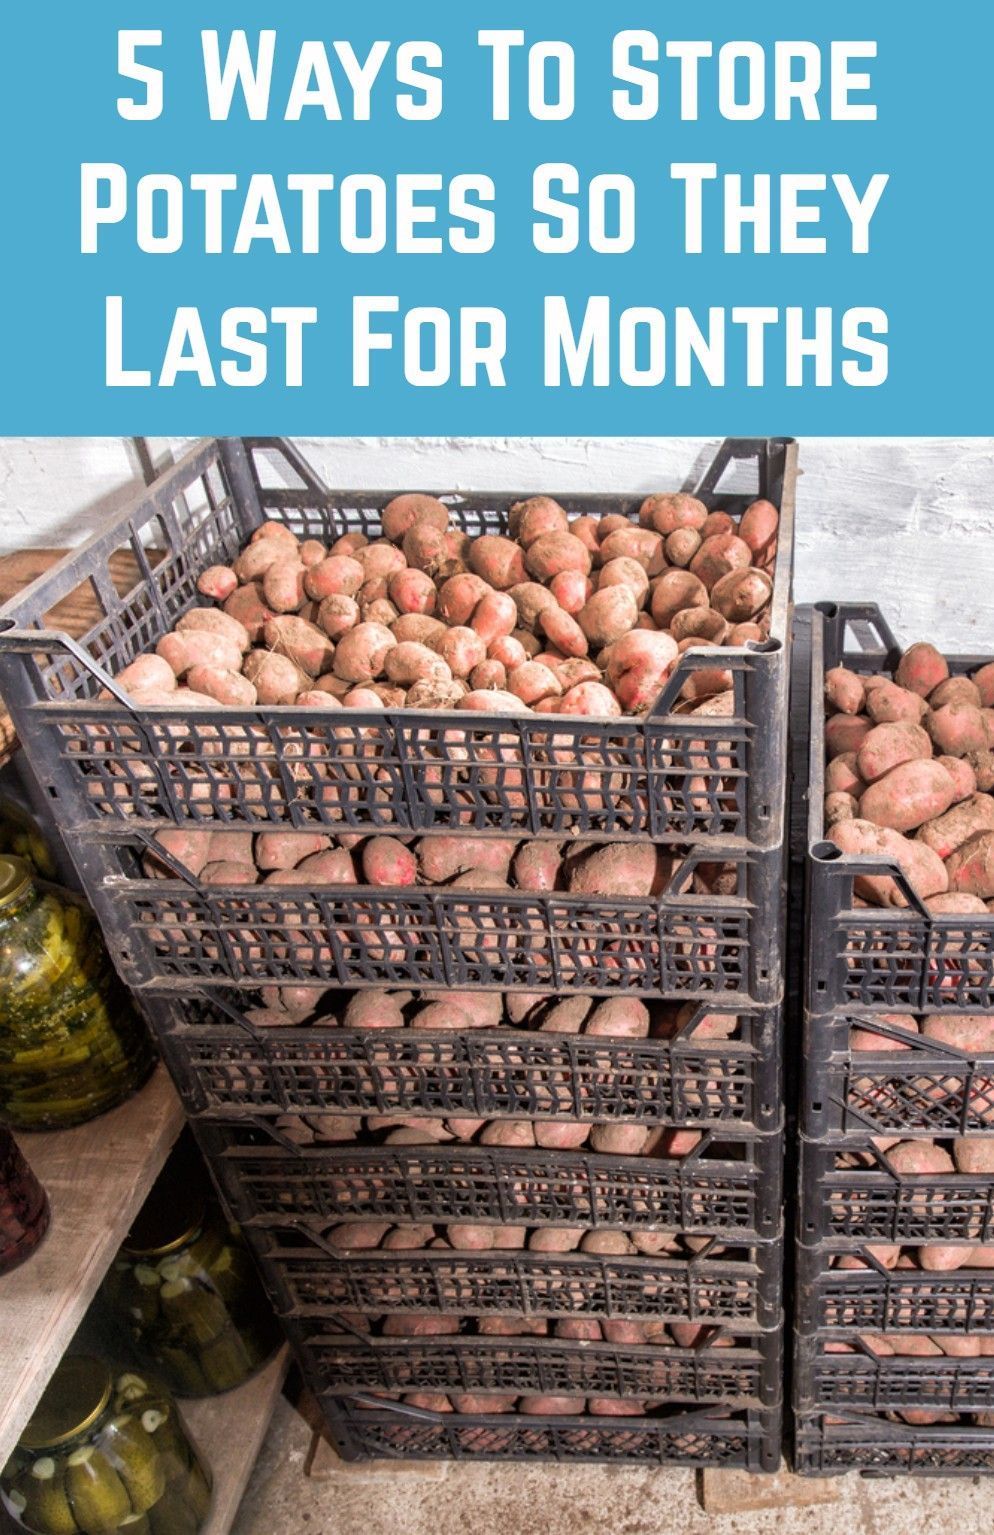 5 Ways To Store Potatoes So They Last For Months - 5 Ways To Store Potatoes So They Last For Months -   19 diy Food potato ideas